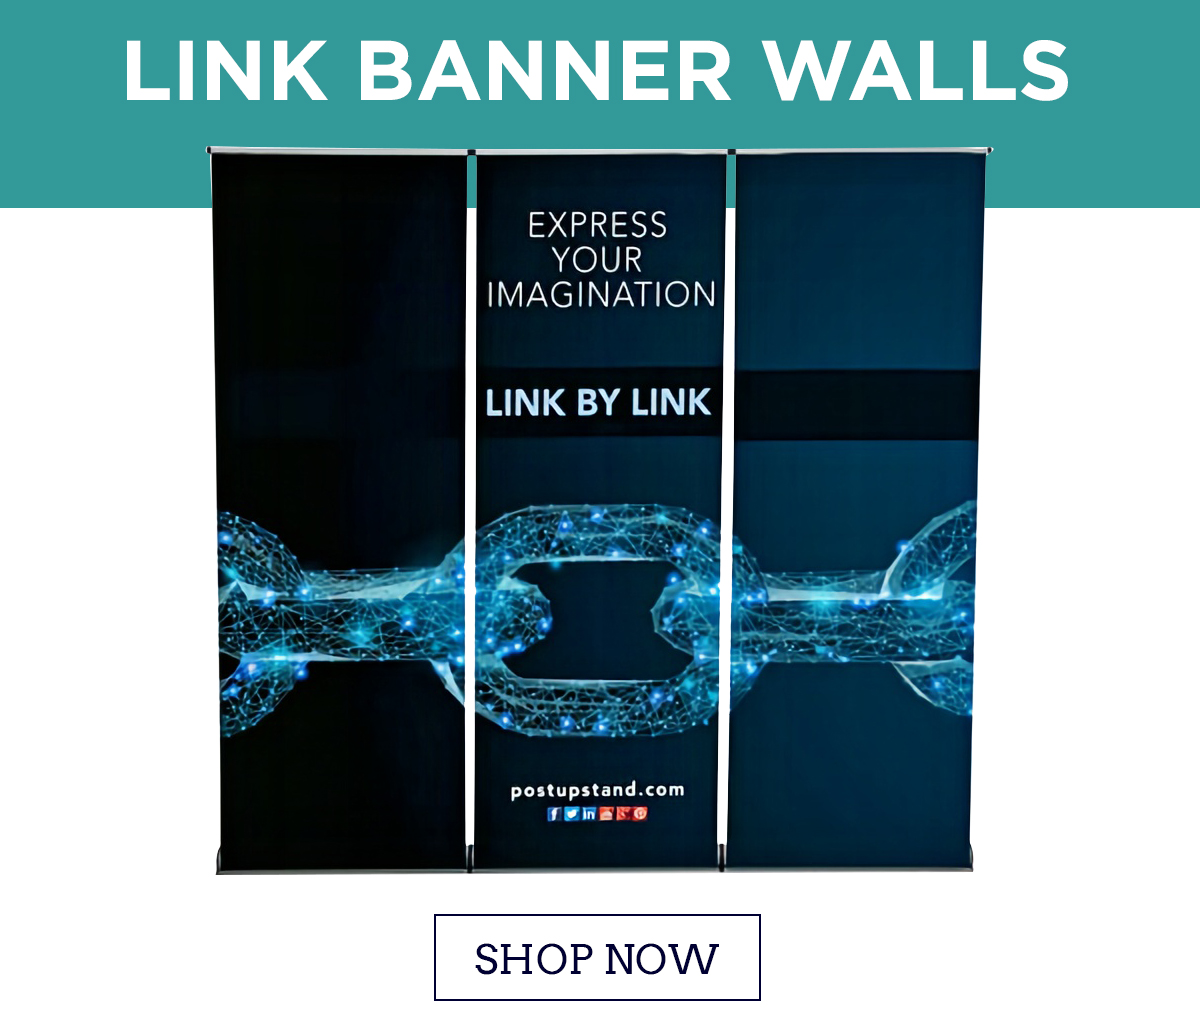 Check Out Link Banner Walls!